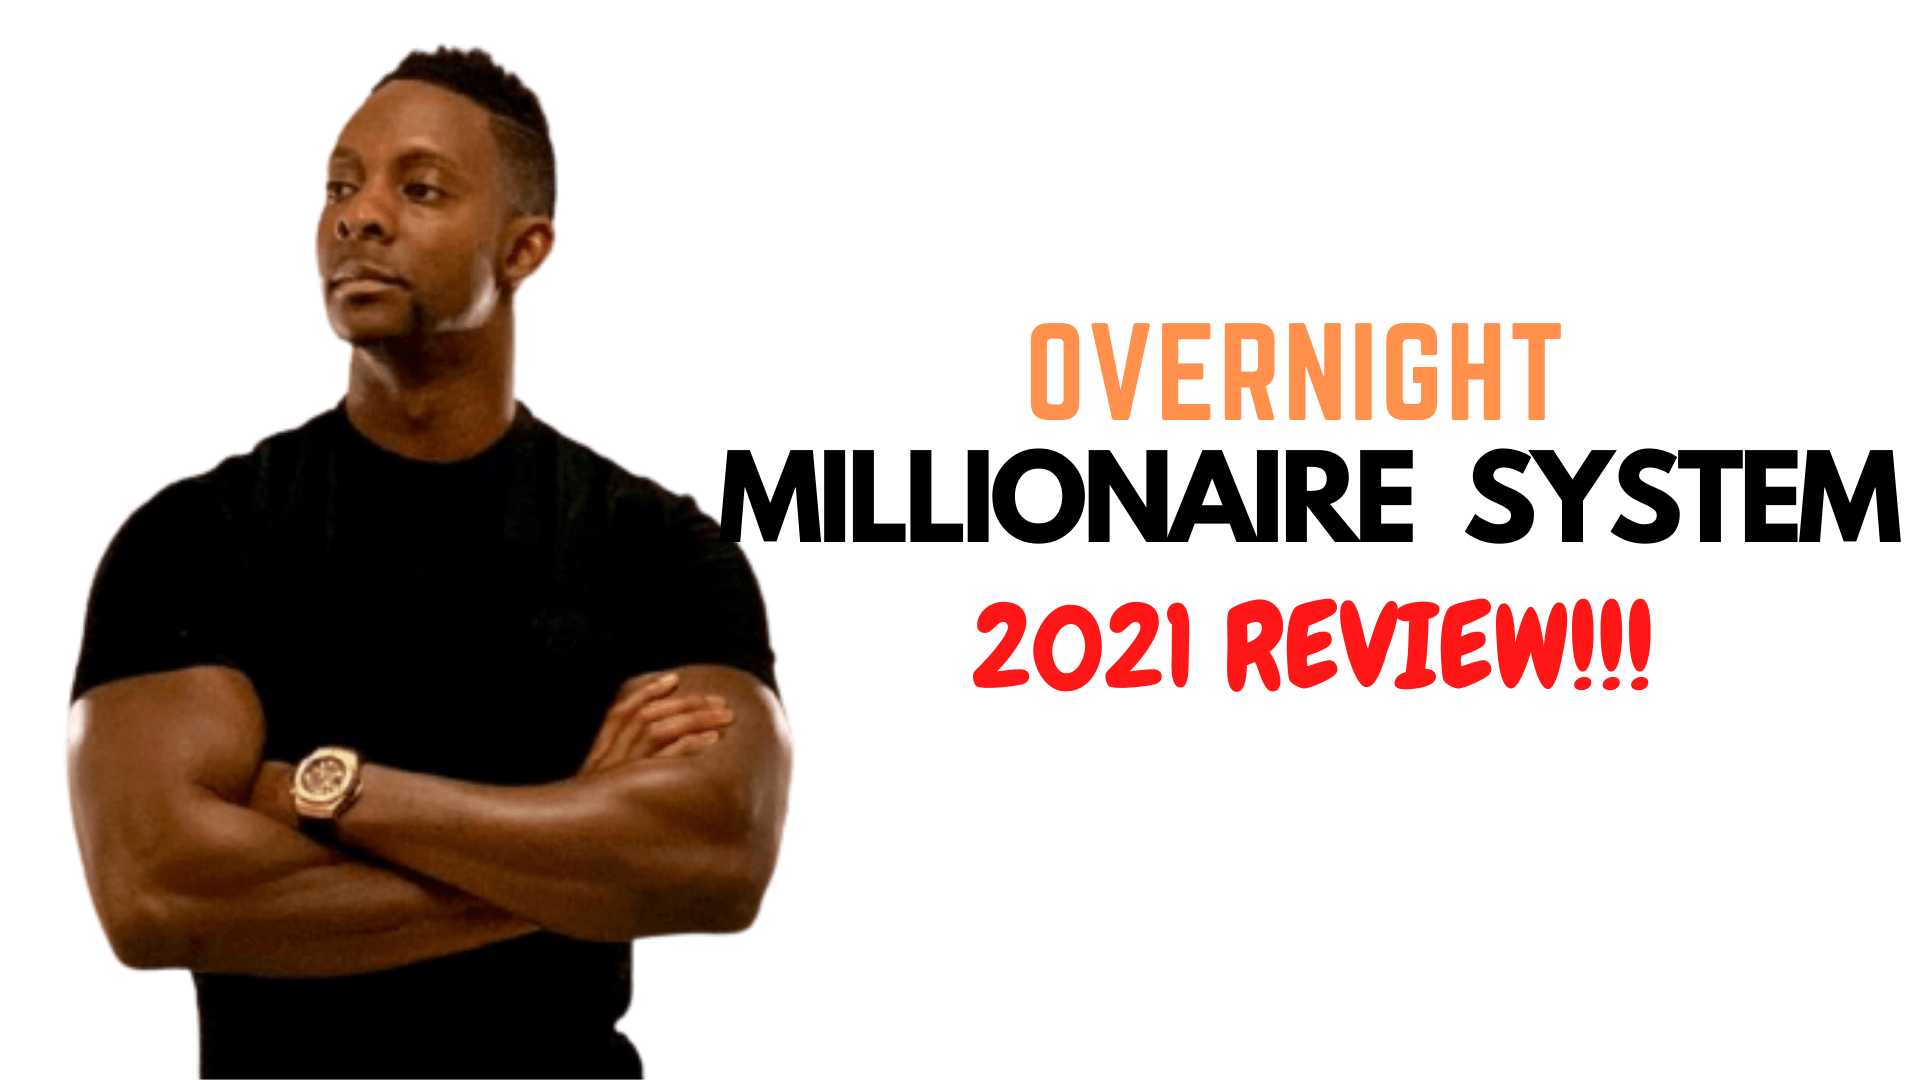 Overnight Millionaire System front page